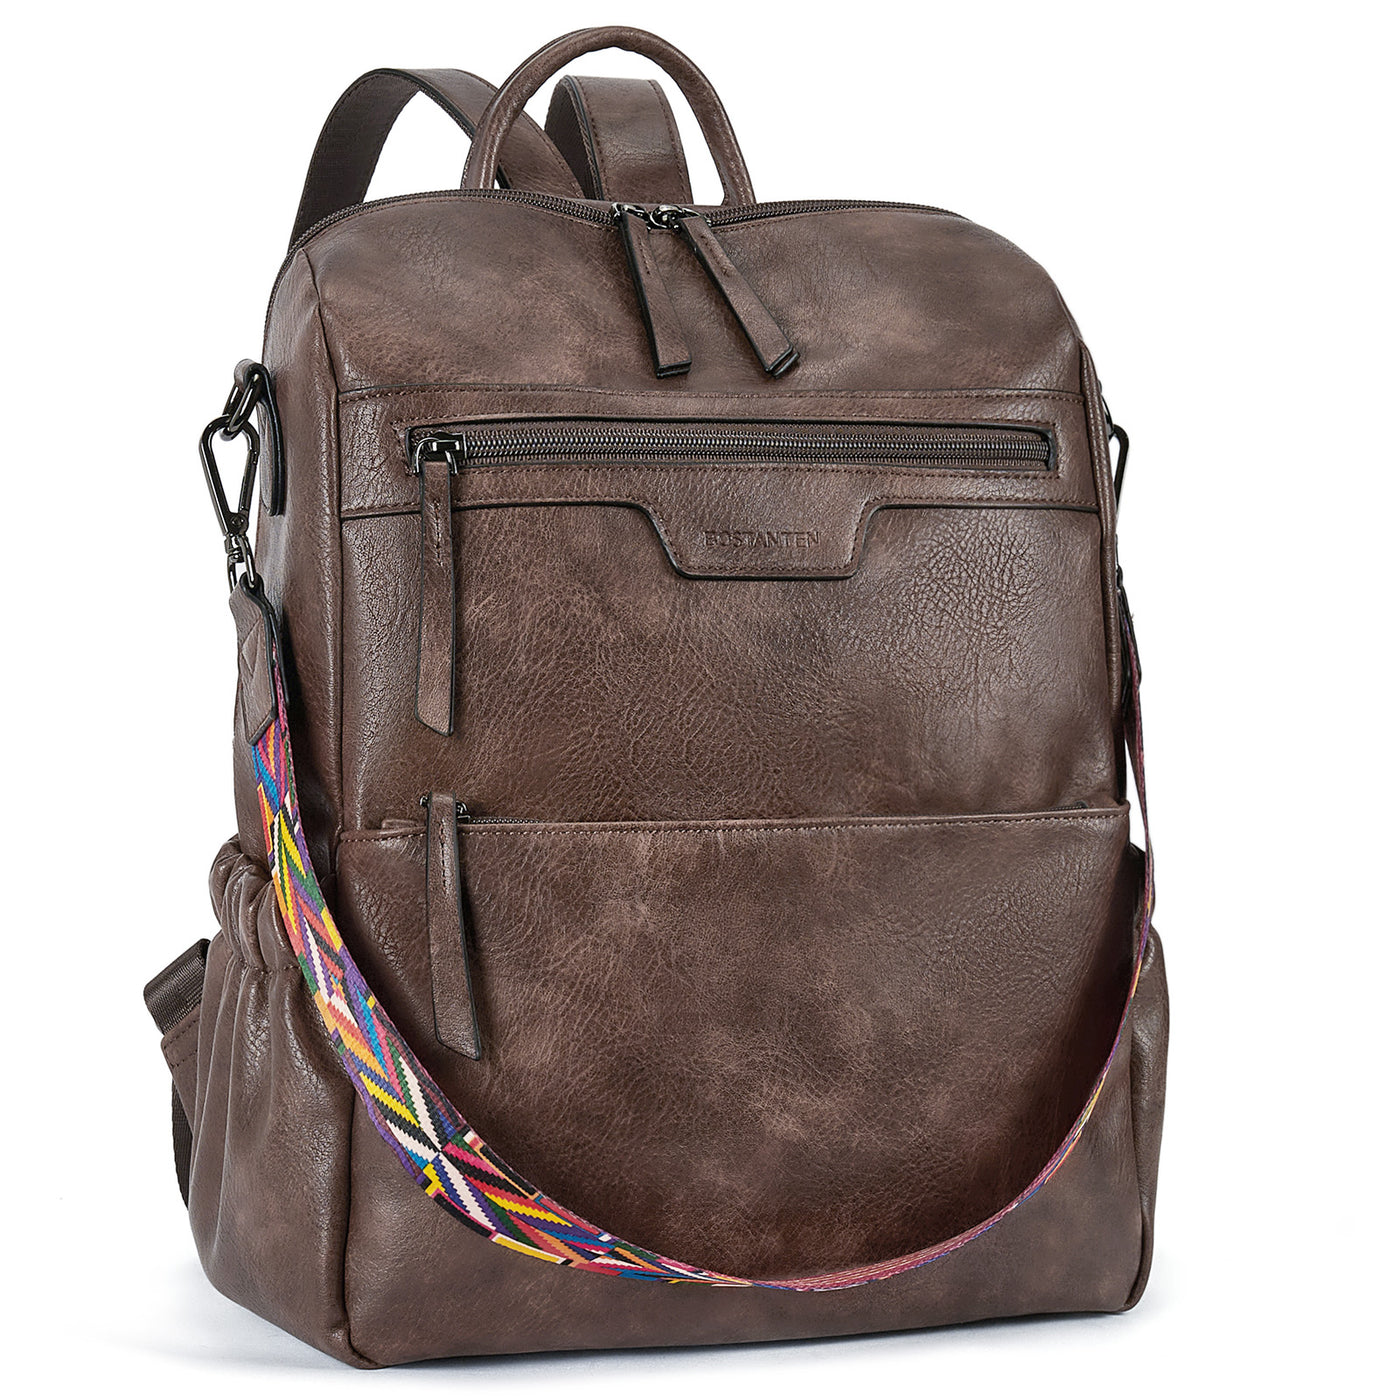 Nombongo Waterproof Leather Backpack with Colorful Convertible Strap